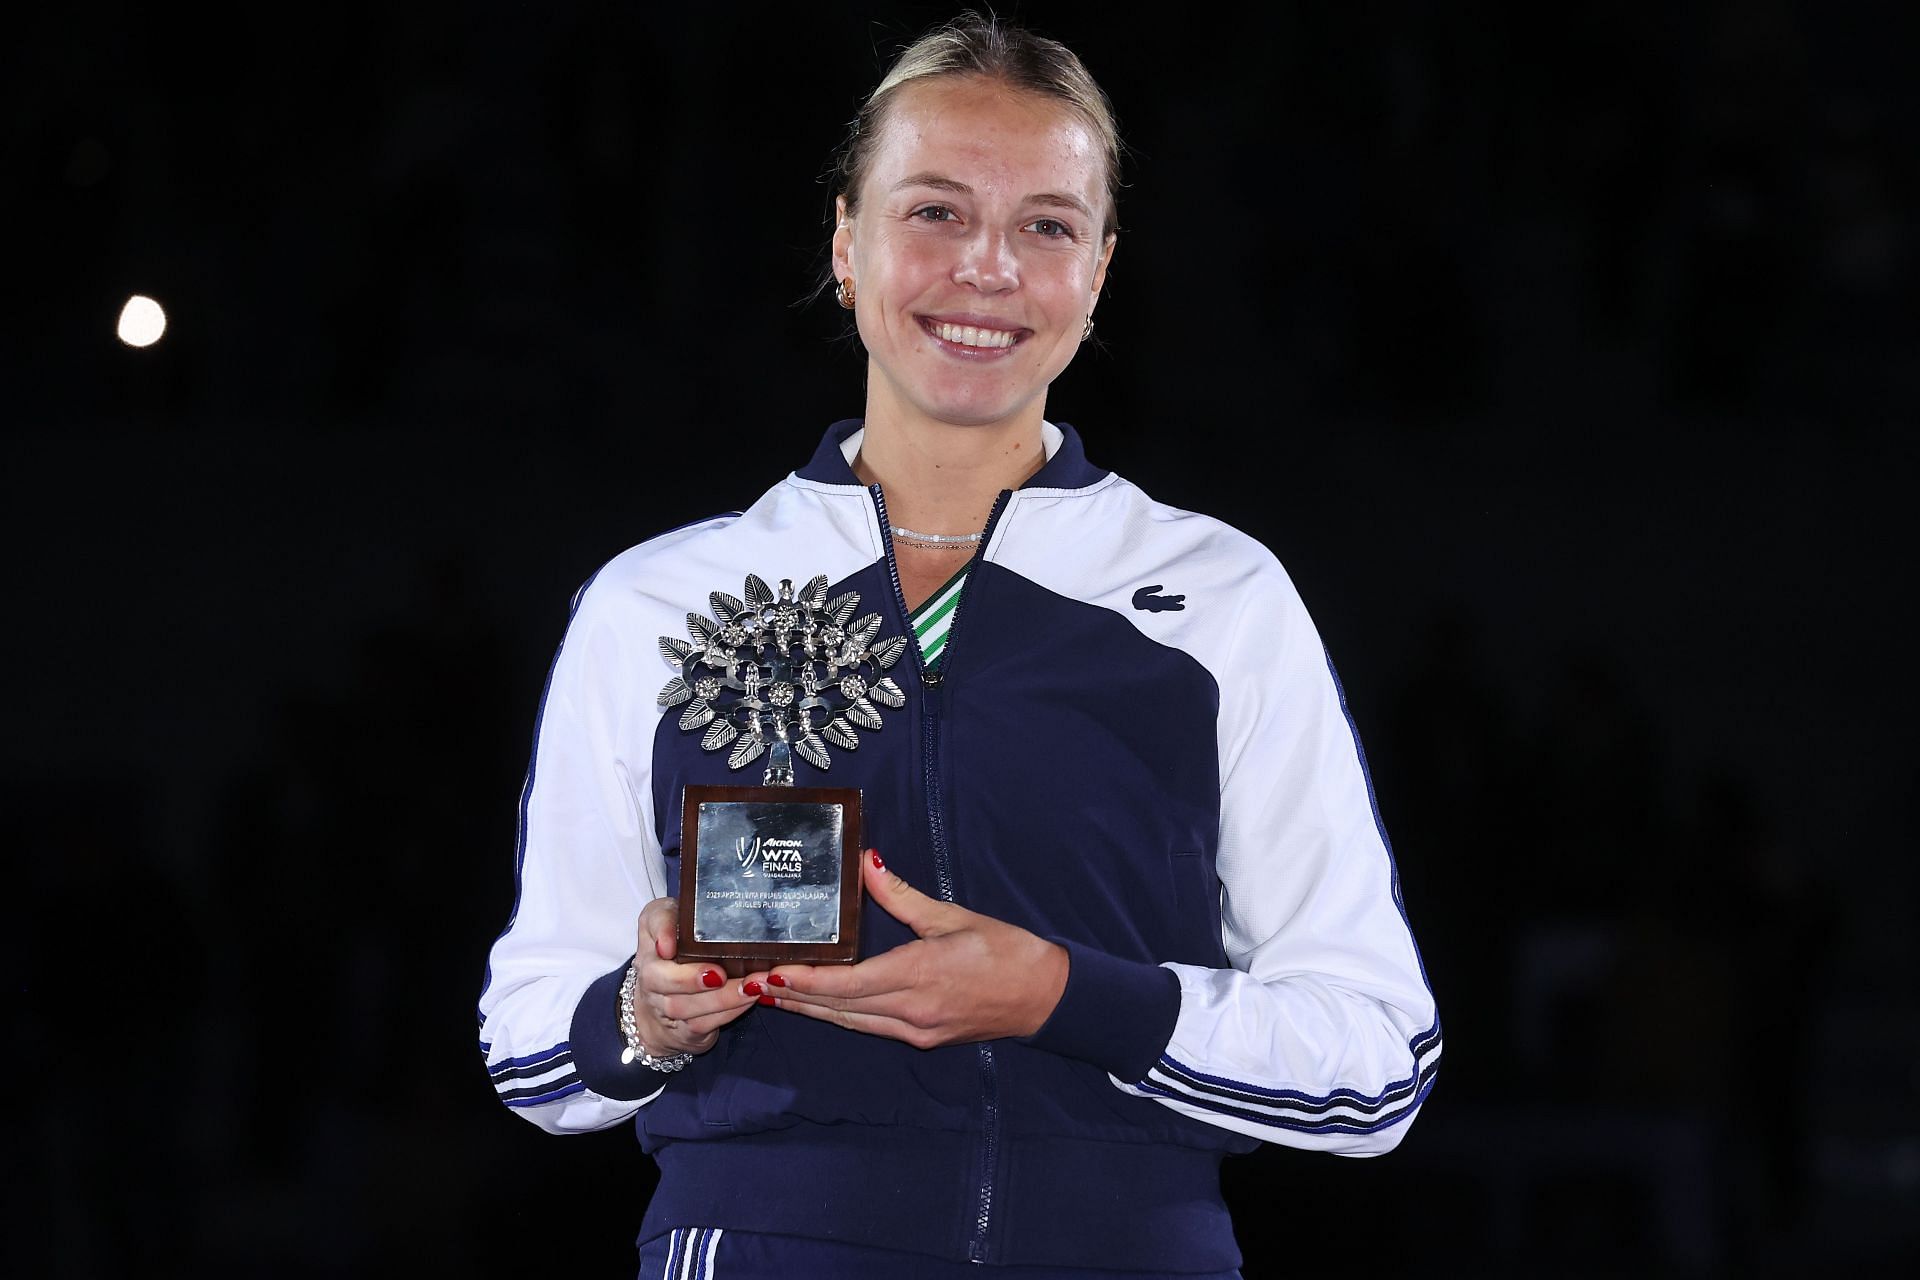 Anett Kontaveit will look to continue her winning ways at the Sydney Tennis Classic.